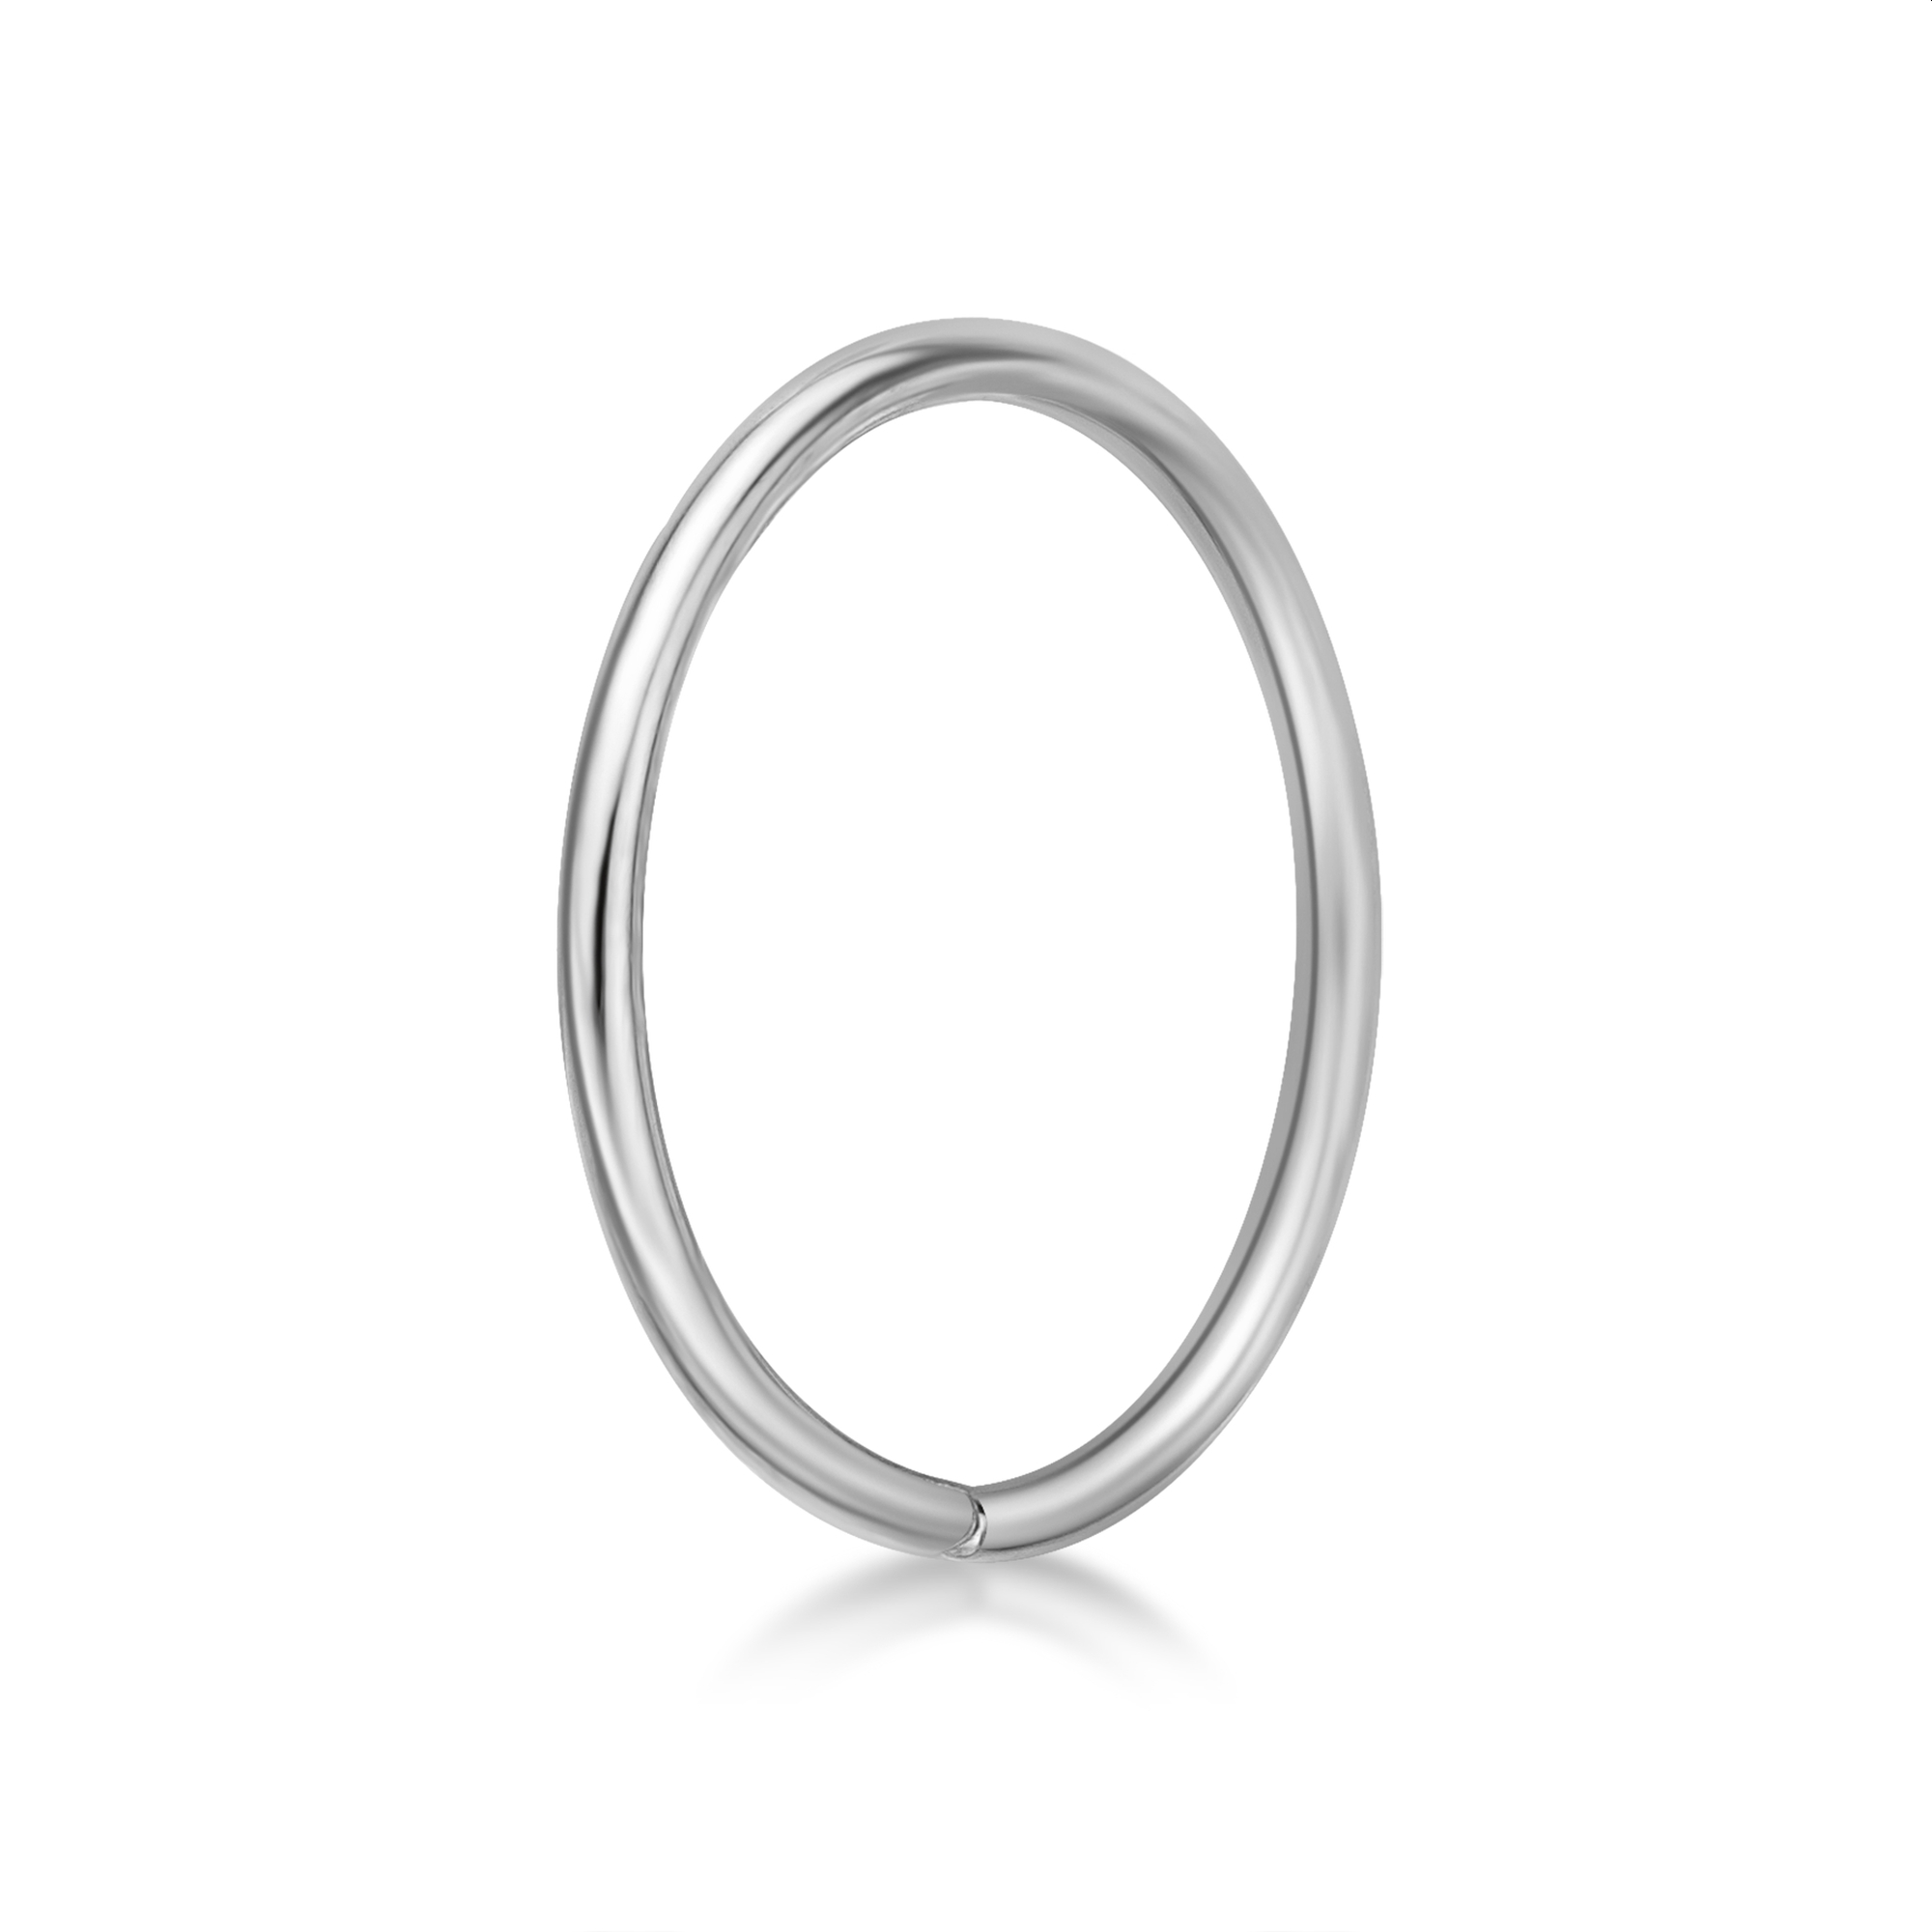 51085-nose-ring-body-jewelry-white-gold-51085.jpg